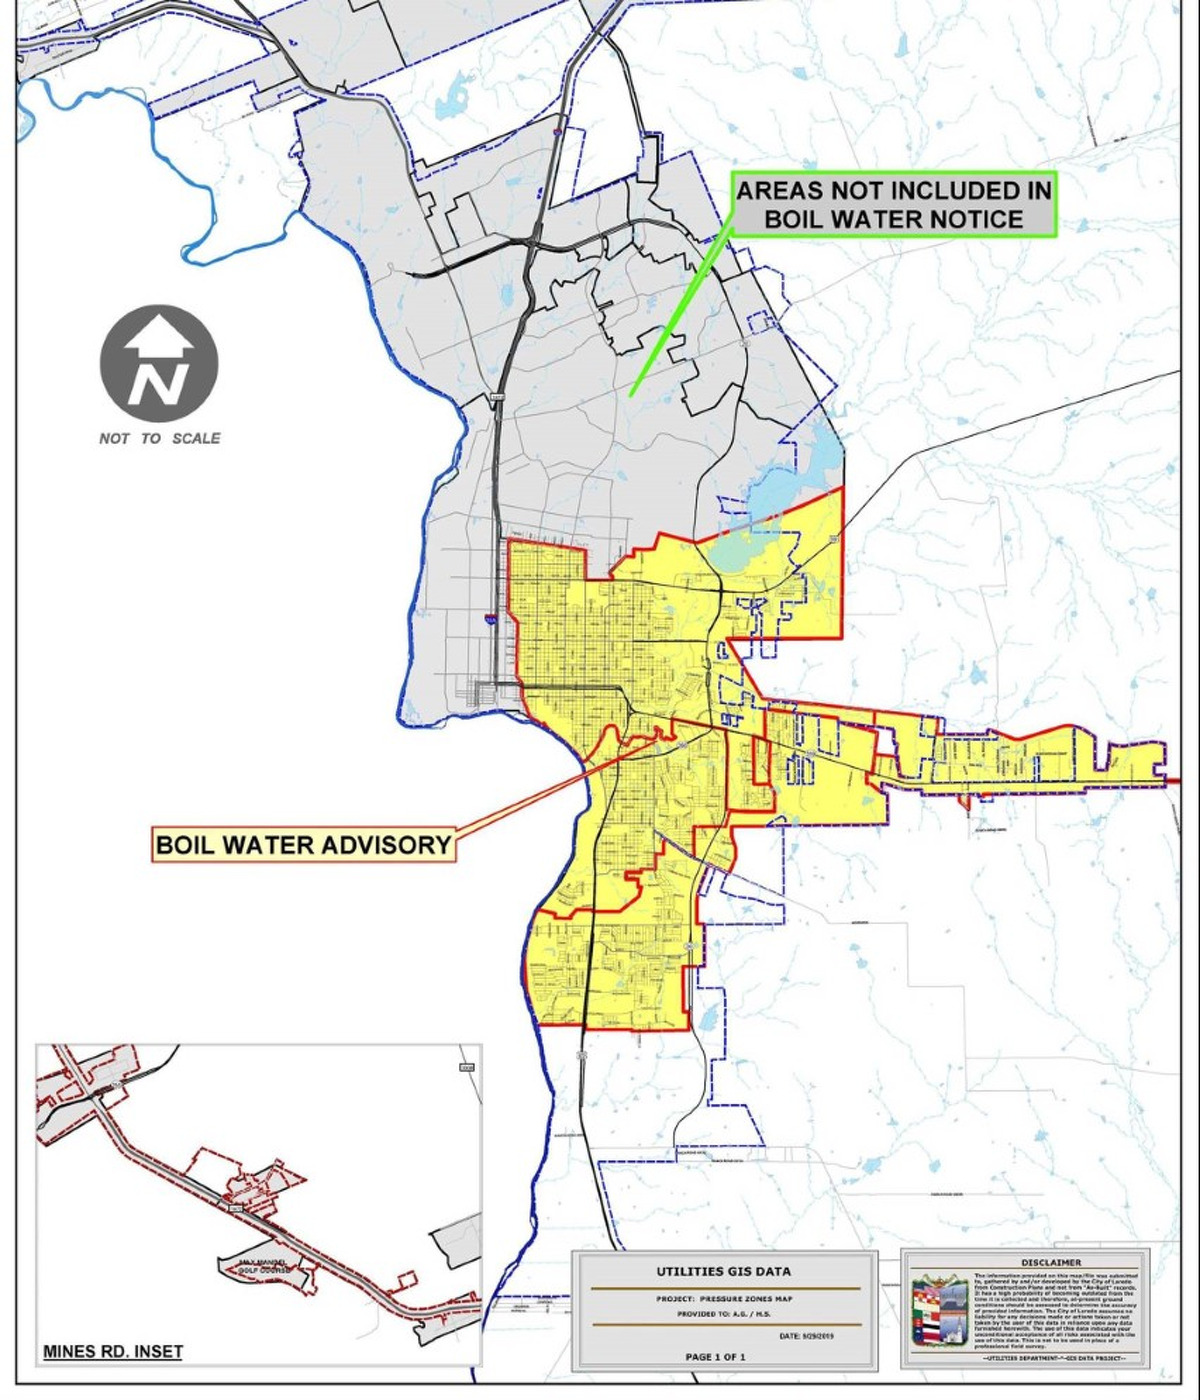 As of this afternoon, the area indicated in the map below has been lifted from the boil water notice. Residents who live in area in shaded in gray in the map below no longer need to boil their water. Everyone who lives in the area highlighted in yellow in the map below still needs to continue to boil their water until further notice.